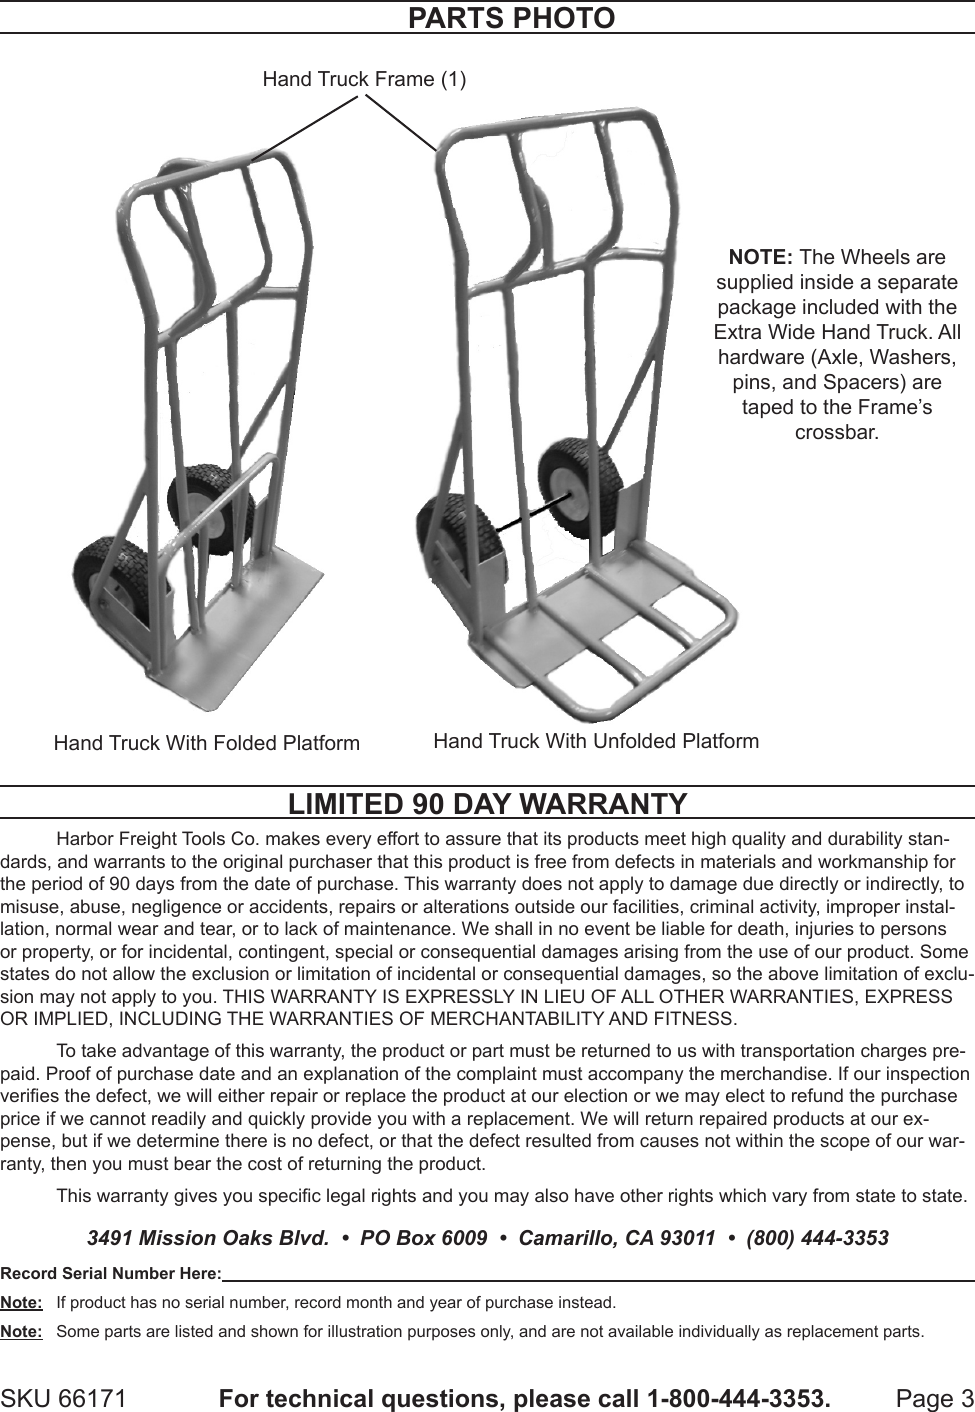 Page 3 of 3 - Harbor-Freight Harbor-Freight-600-Lb-Capacity-Extra-Wide-Hand-Truck-Product-Manual-  Harbor-freight-600-lb-capacity-extra-wide-hand-truck-product-manual